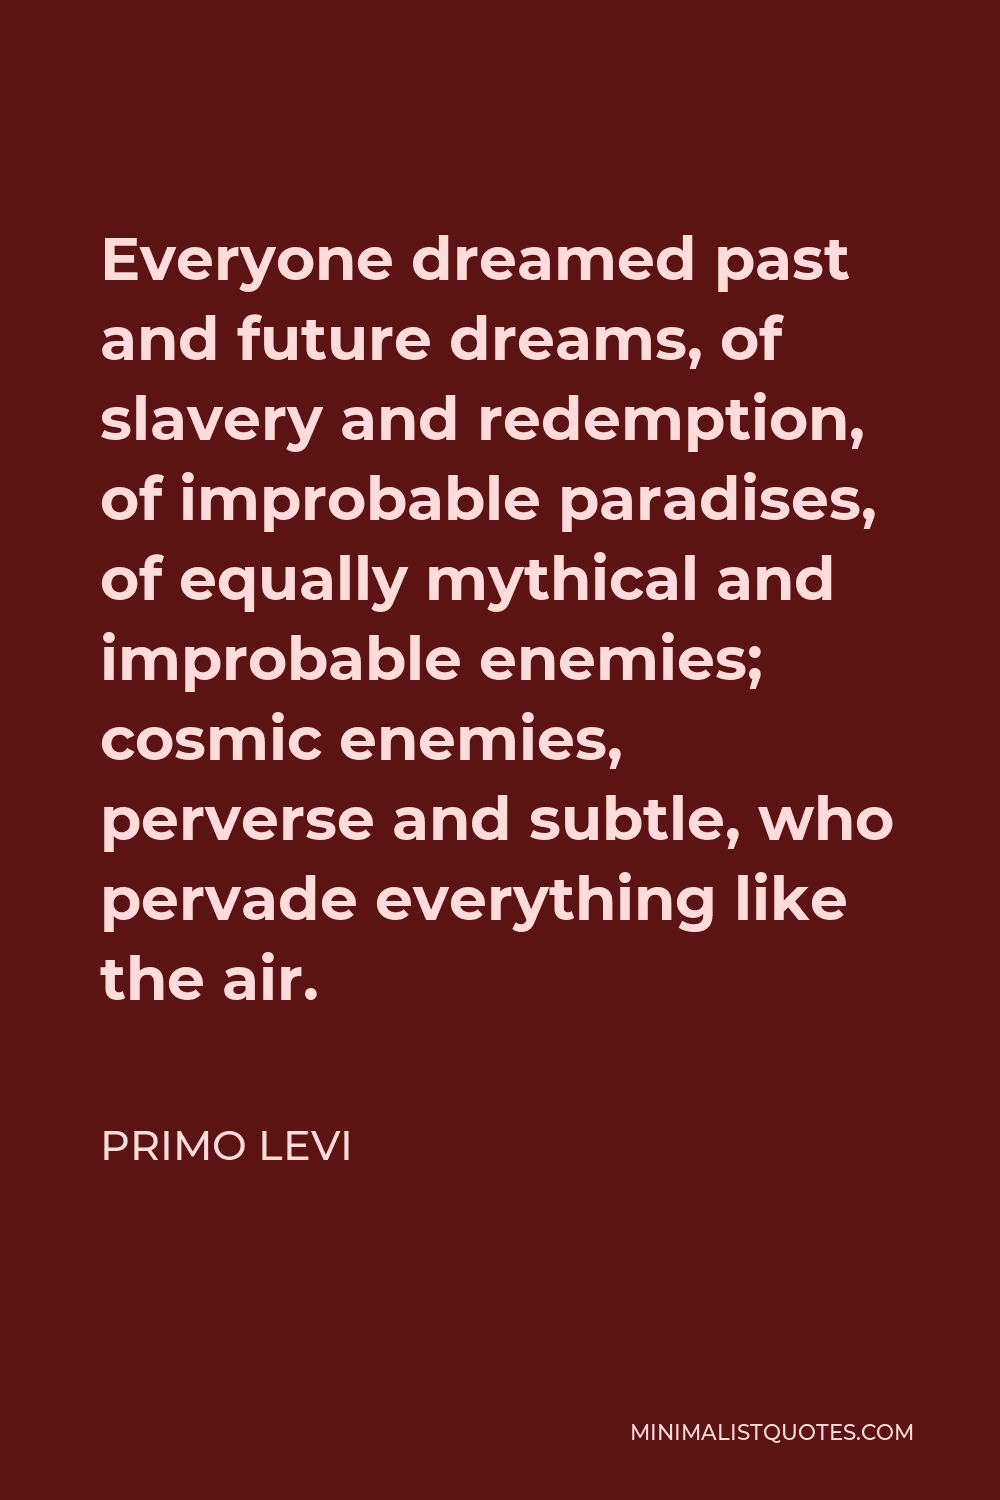 Primo Levi Quote - Everyone dreamed past and future dreams, of slavery and redemption, of improbable paradises, of equally mythical and improbable enemies; cosmic enemies, perverse and subtle, who pervade everything like the air.